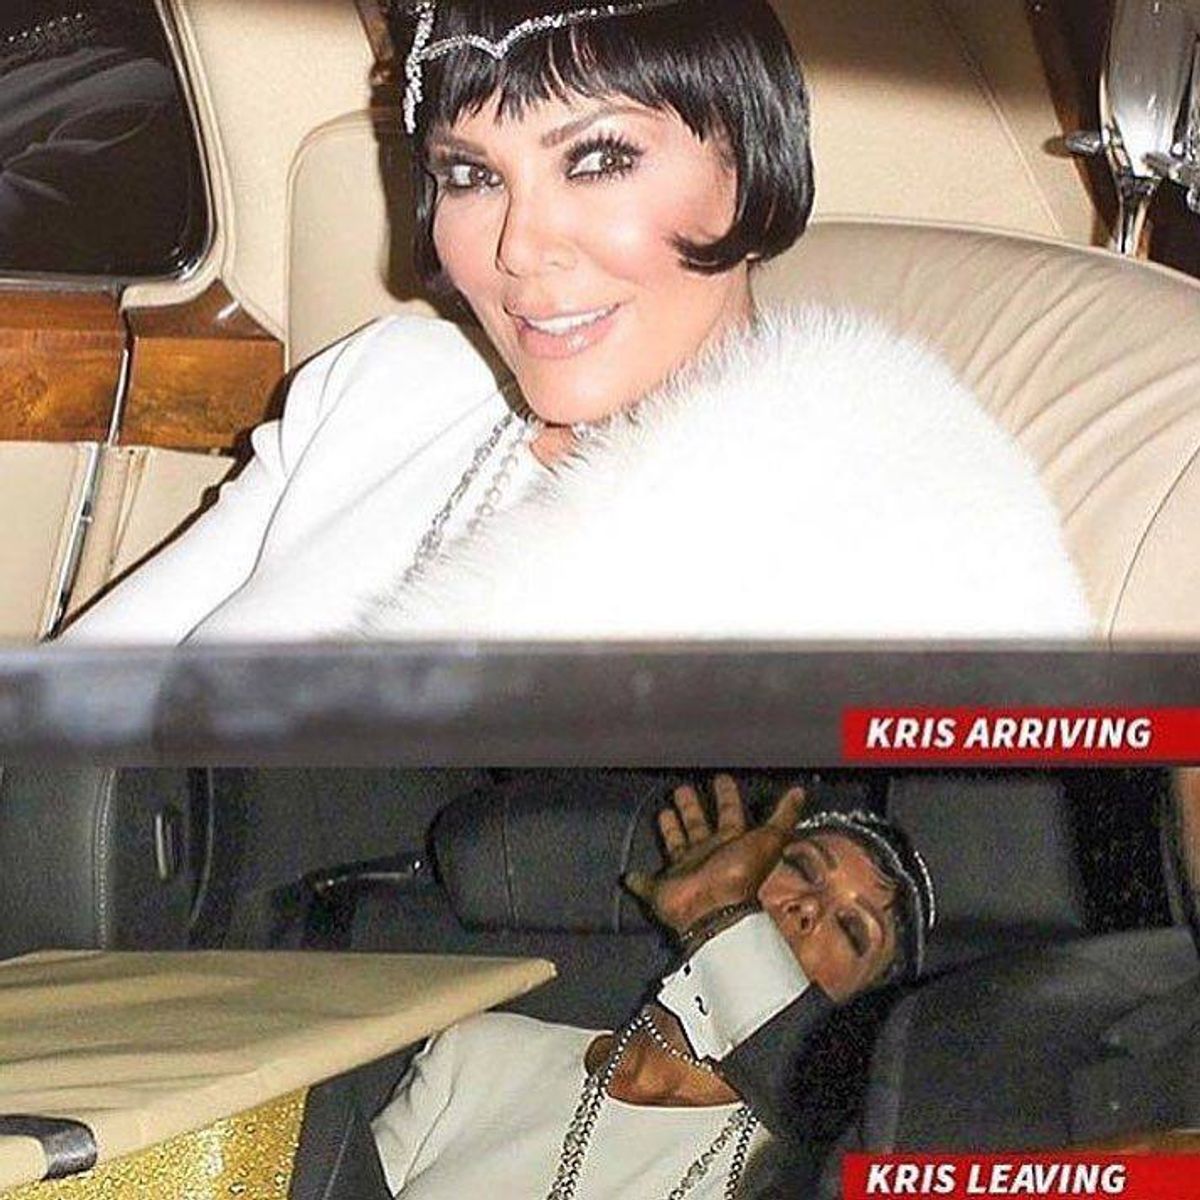 10 Times Kris Jenner Failed At Parenting